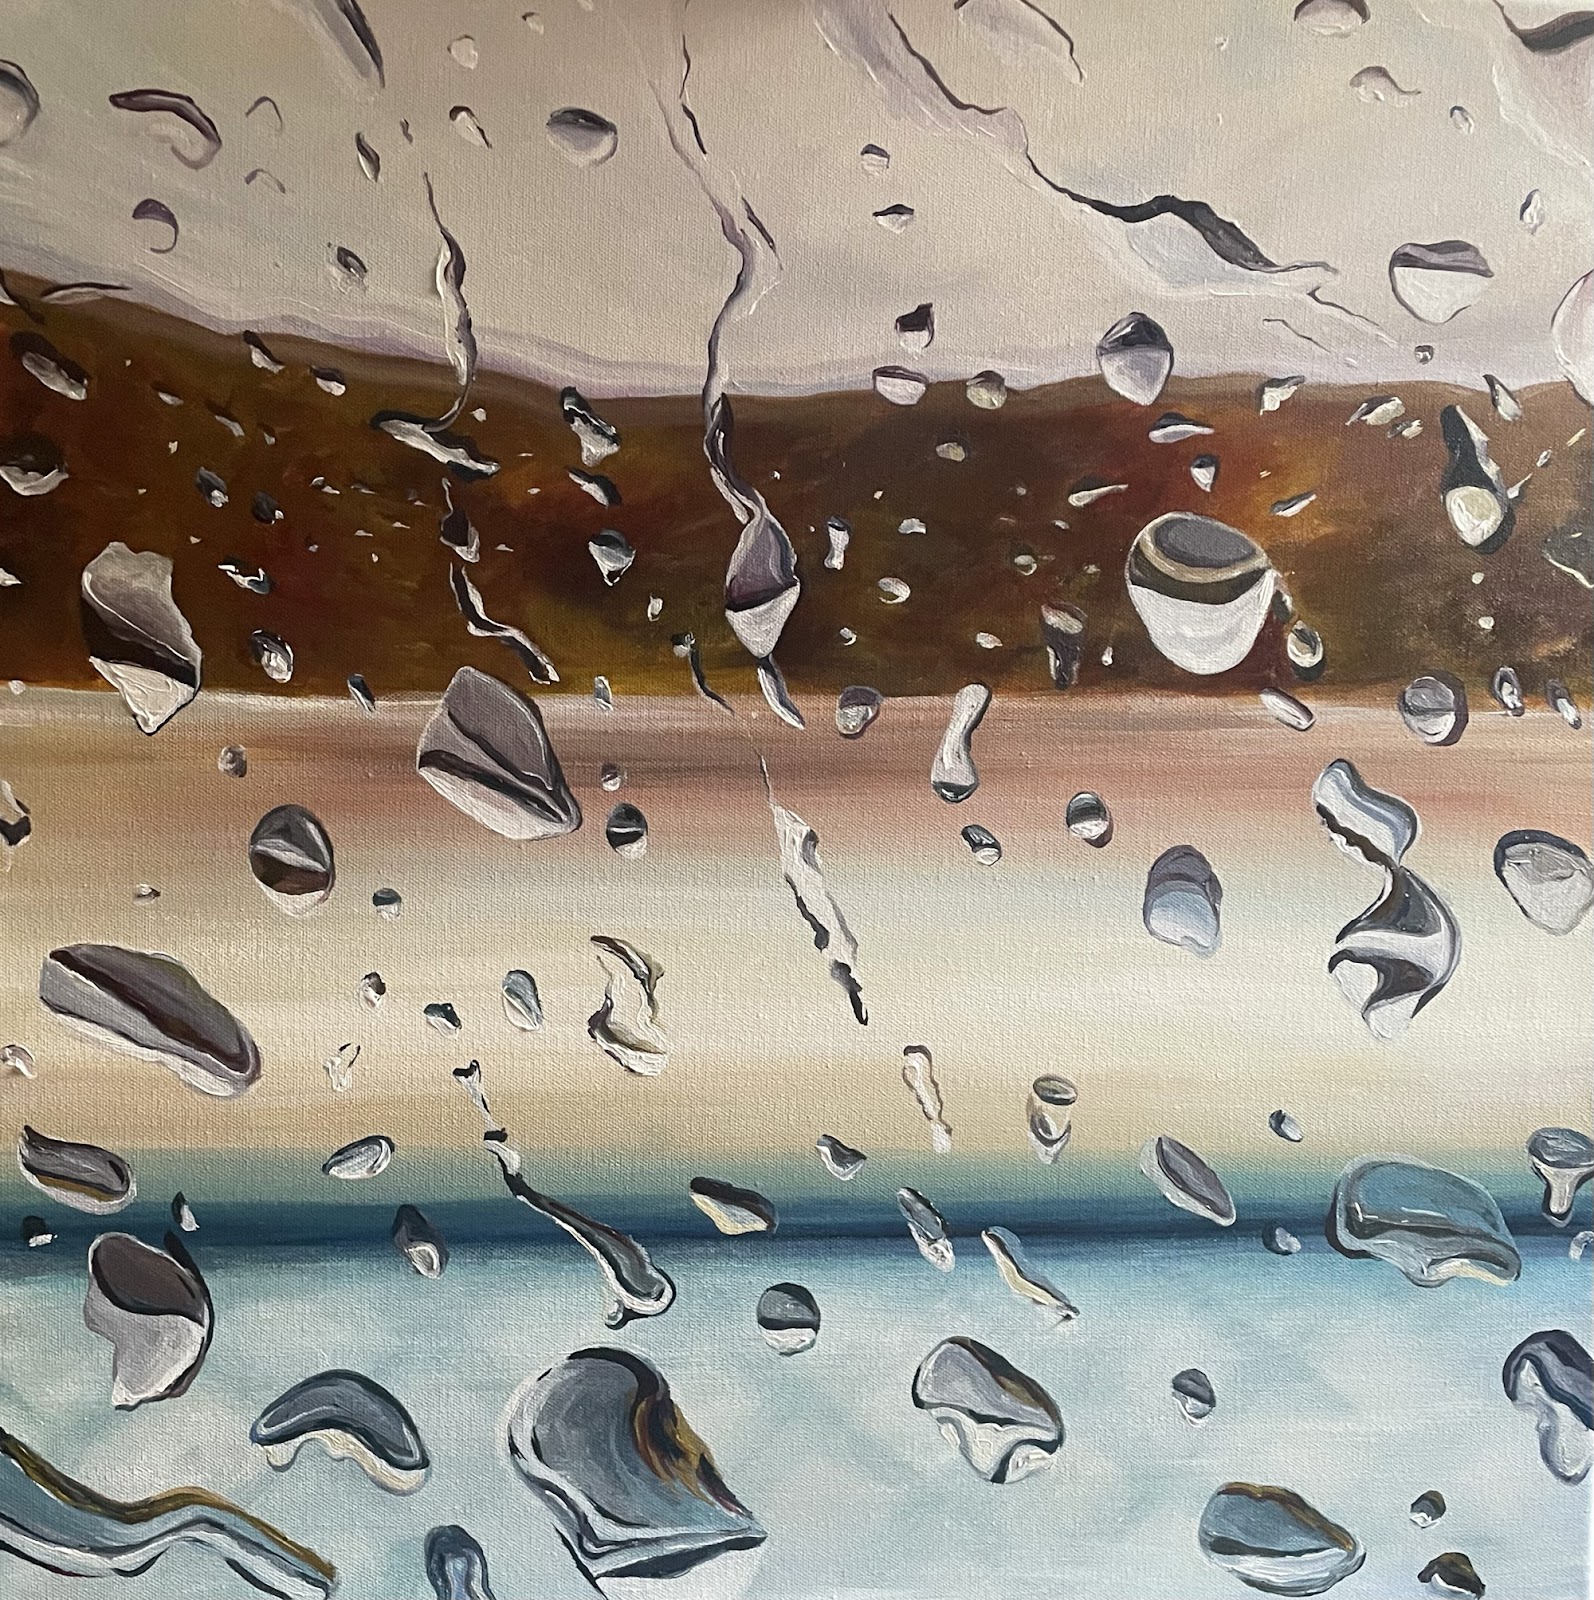 Water droplets on a background of tan, brown and blue bands of color